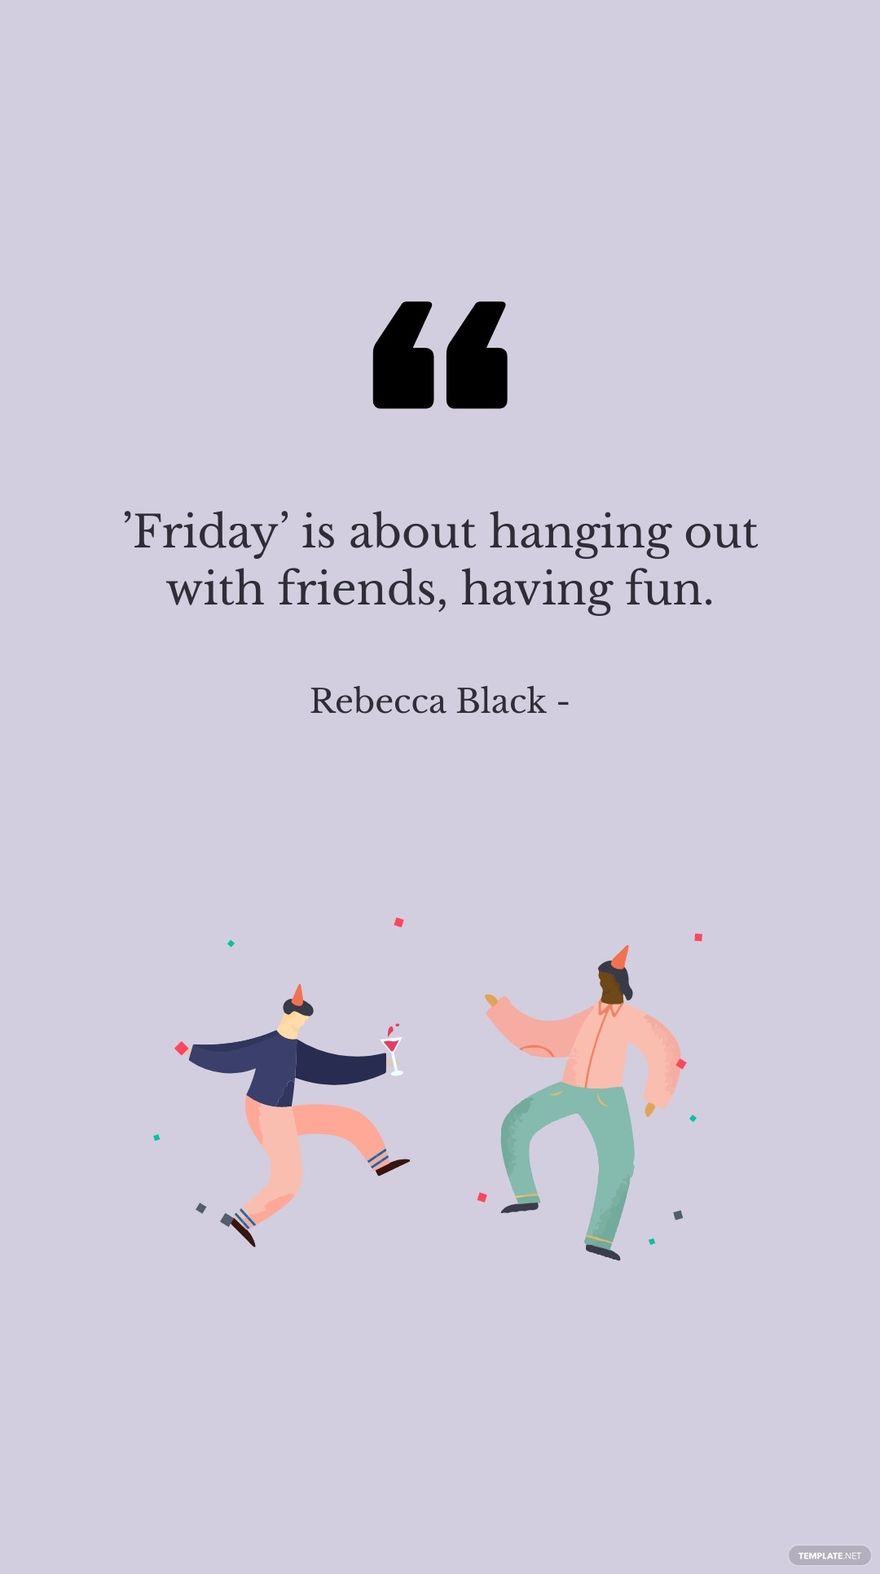 Free Rebecca Black - ’Friday’ is about hanging out with friends, having fun. in JPG